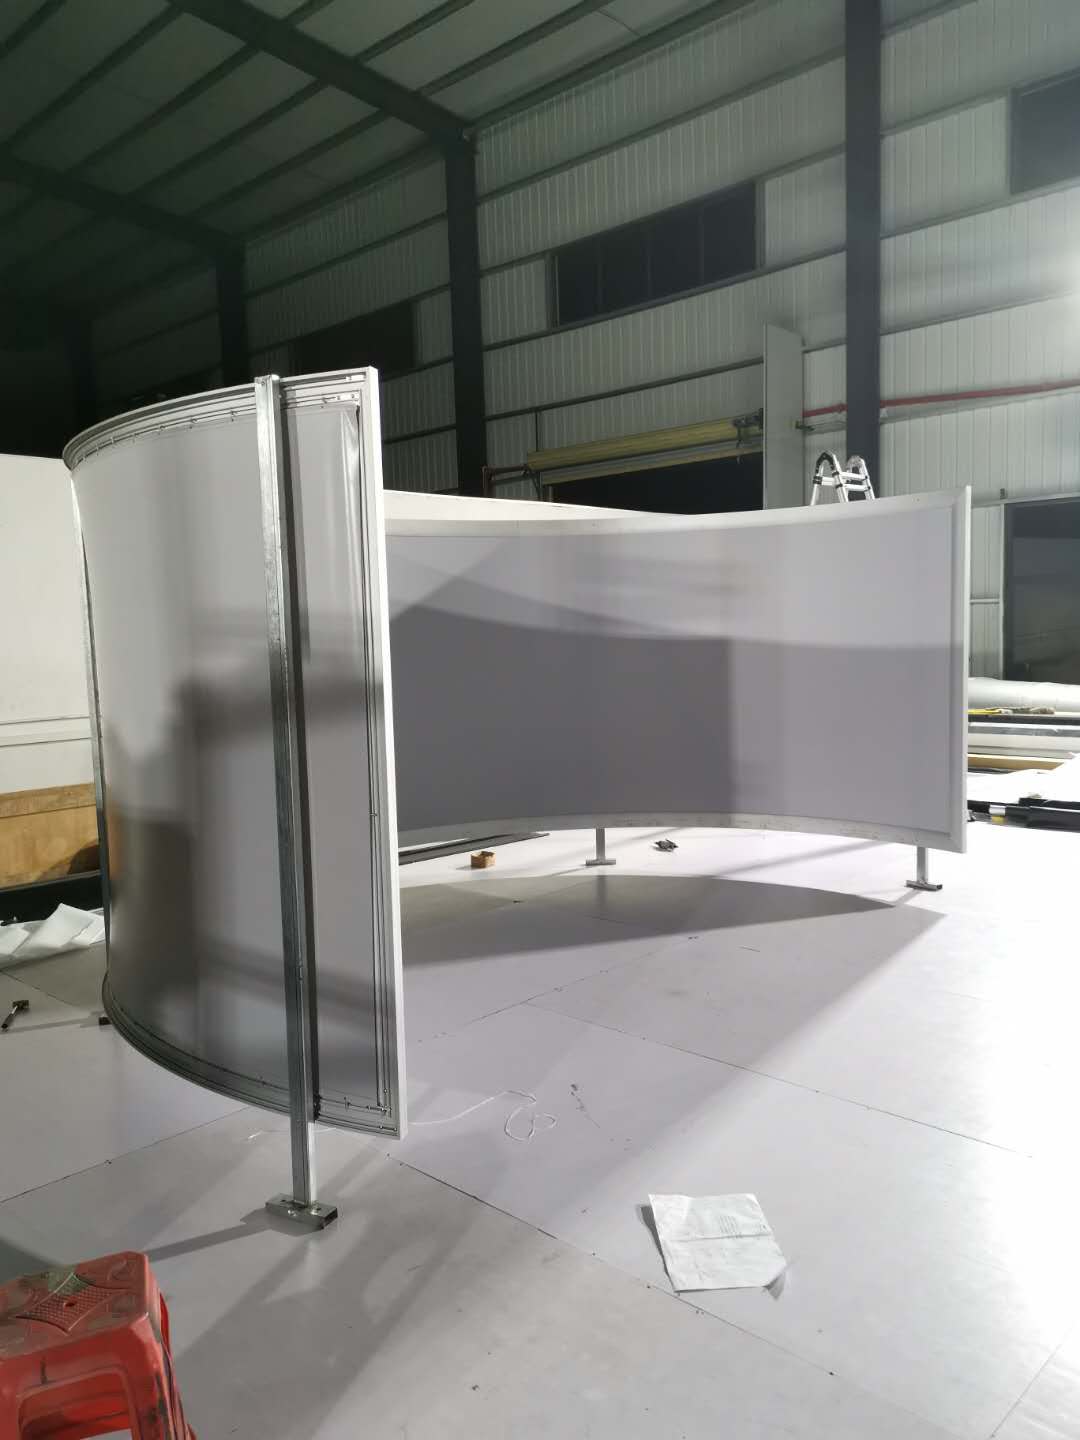 180 Degree Economy Simulation Projection Screen Curved Screen in 4m Diameter, Front Projection